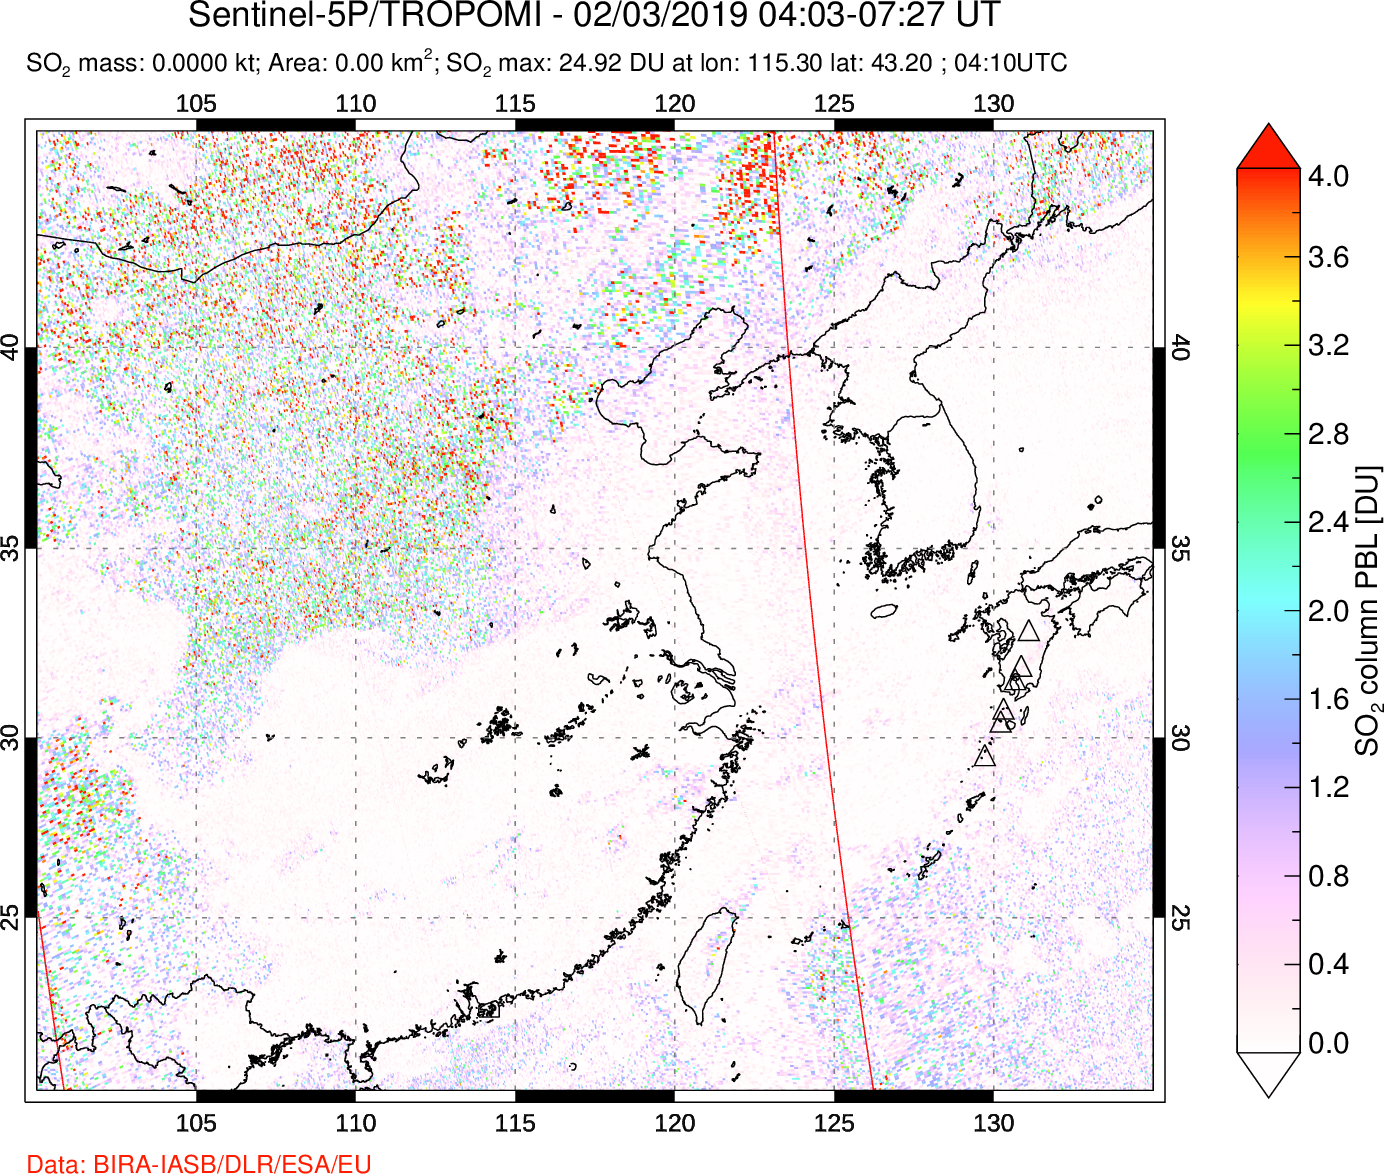 A sulfur dioxide image over Eastern China on Feb 03, 2019.